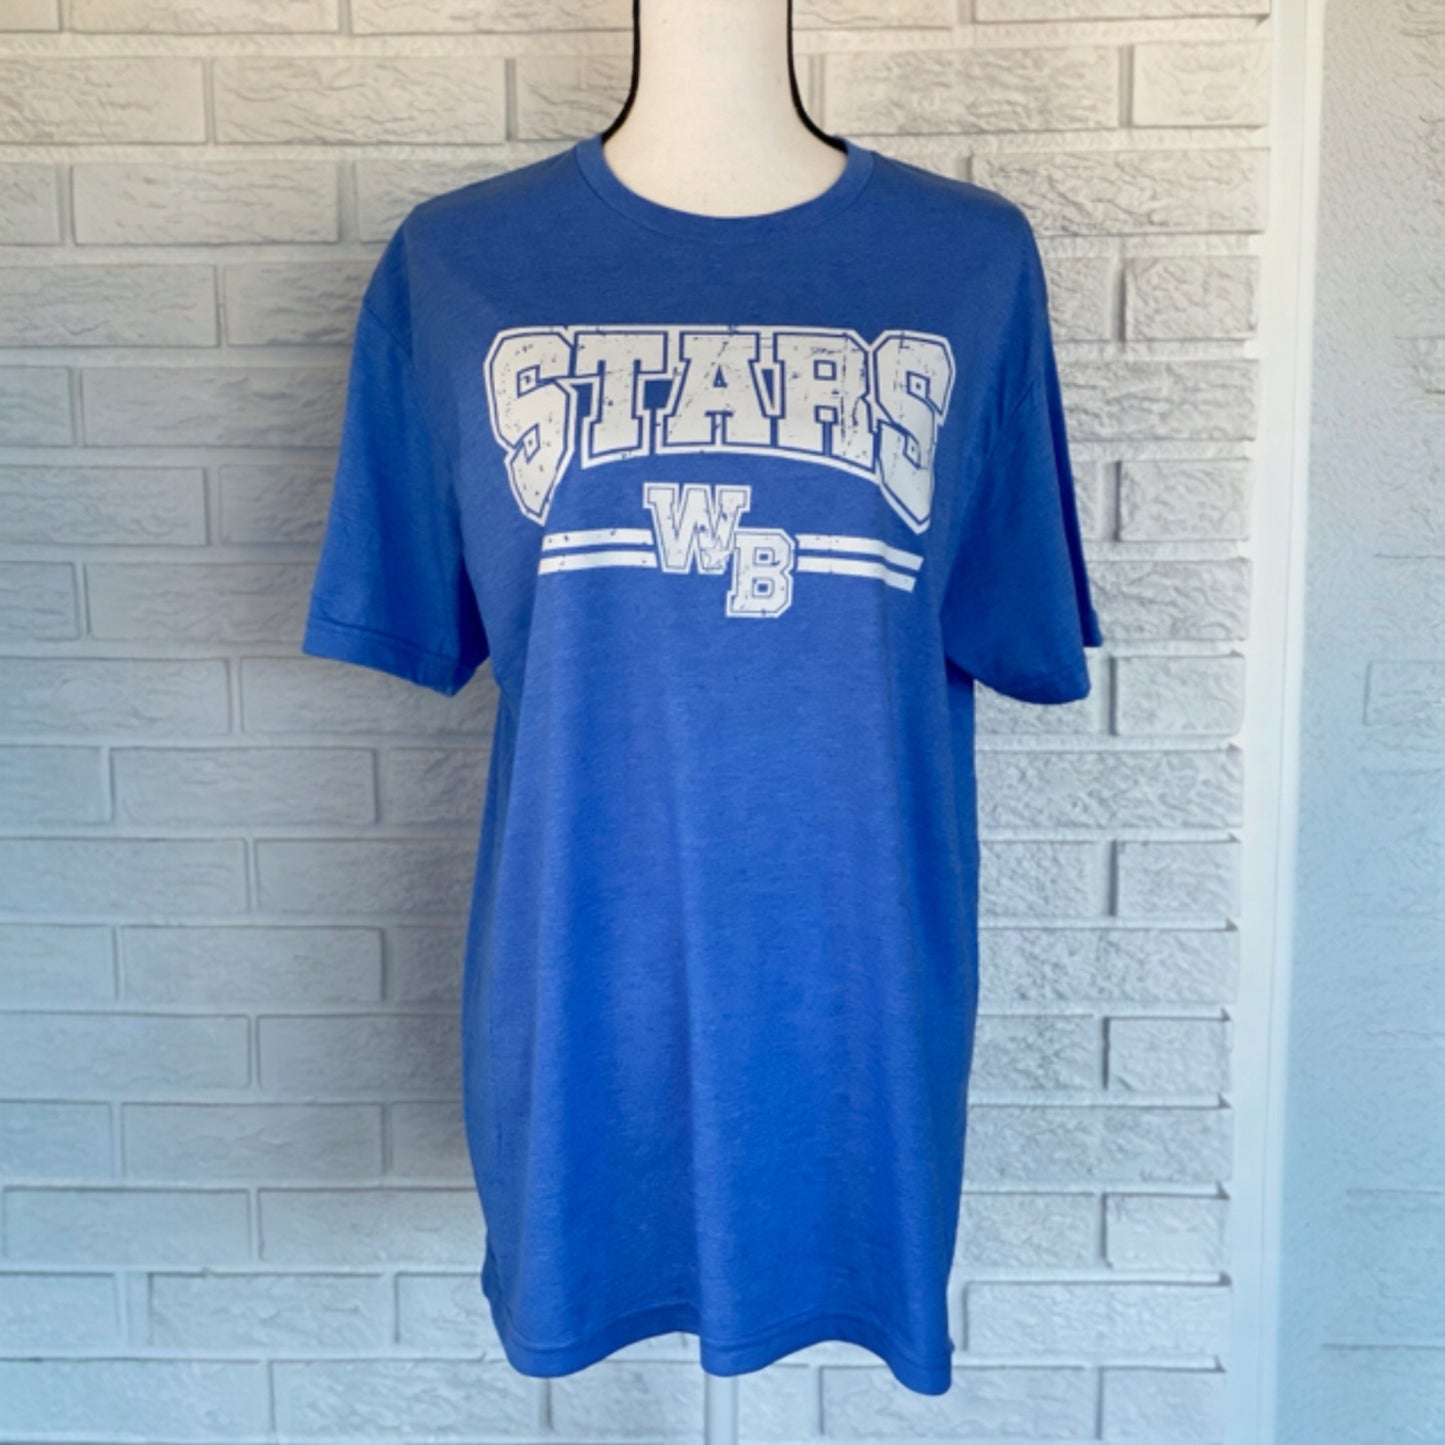 Western Boone Stars Graphic Tee - Size Small